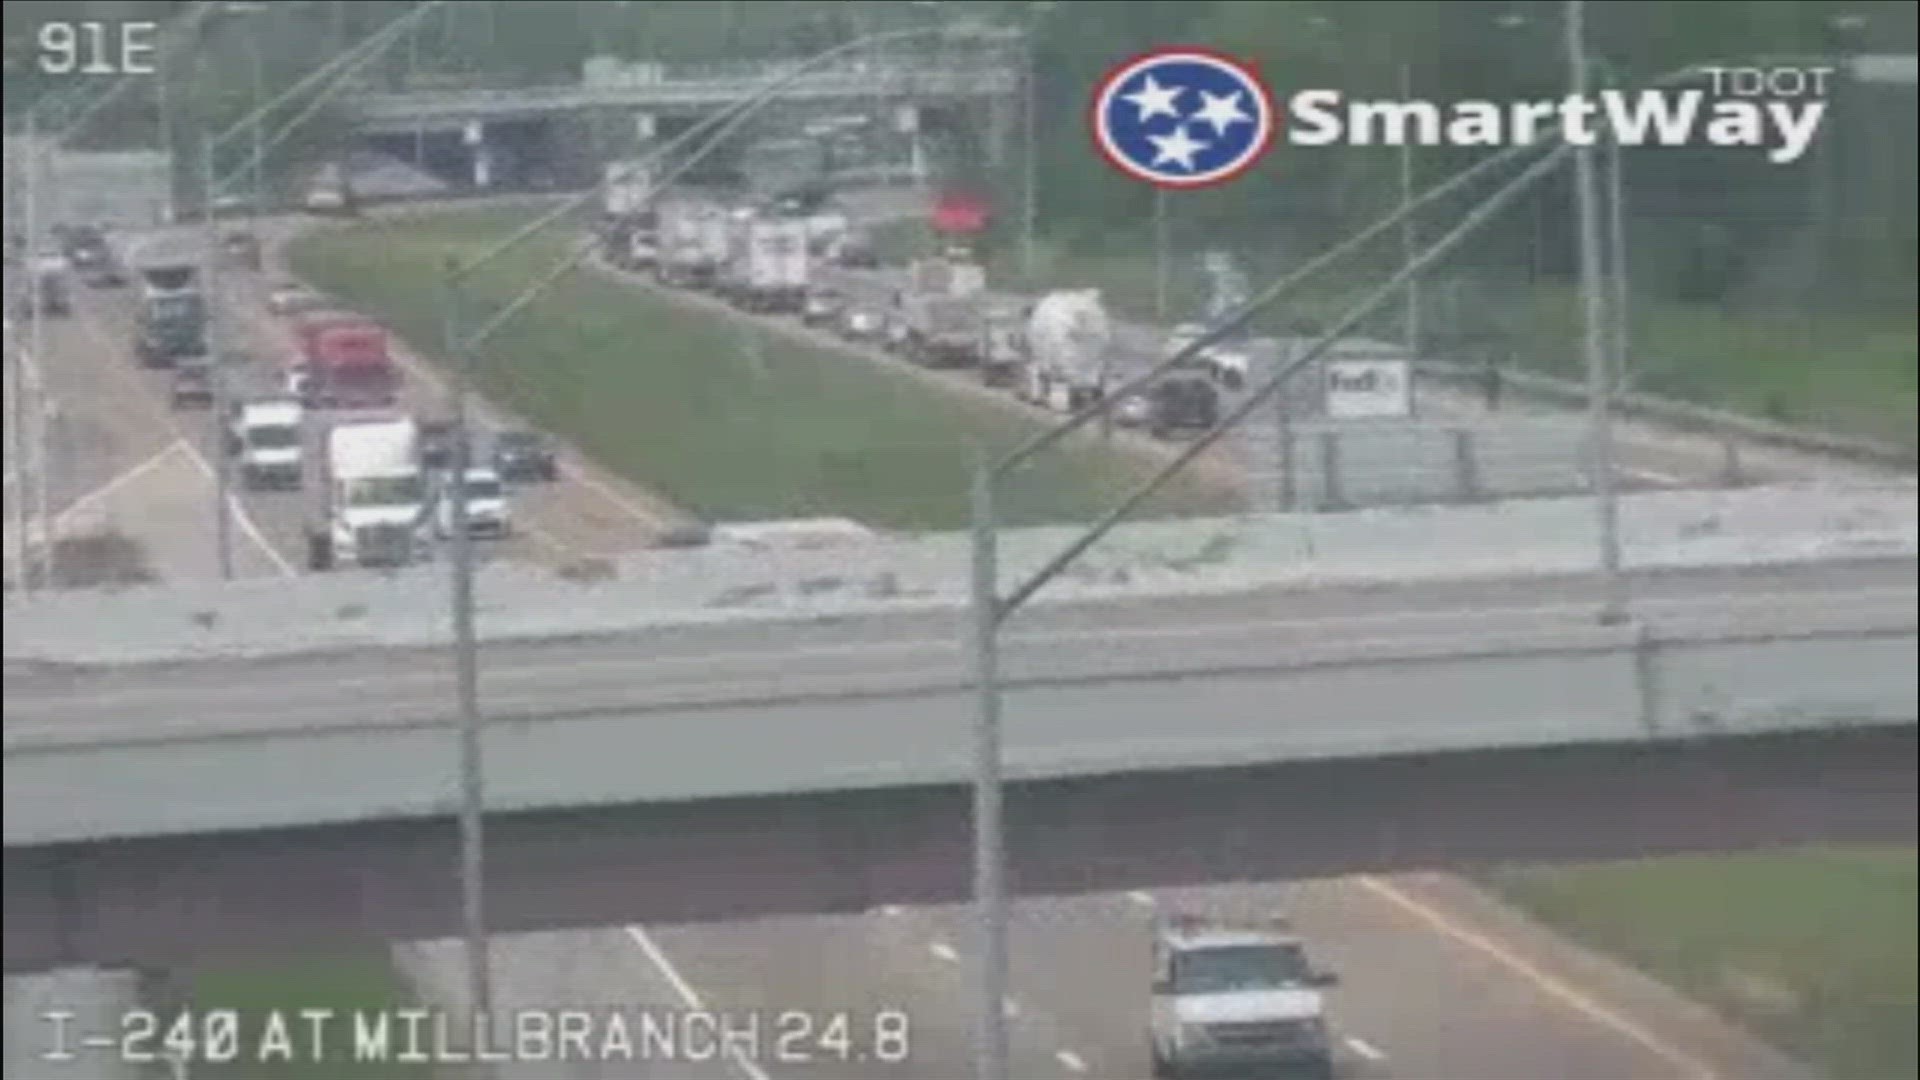 The Memphis Police Department said officers received the shooting call Monday, April 16, around 7 a.m. at I-240 and Millbranch Road.